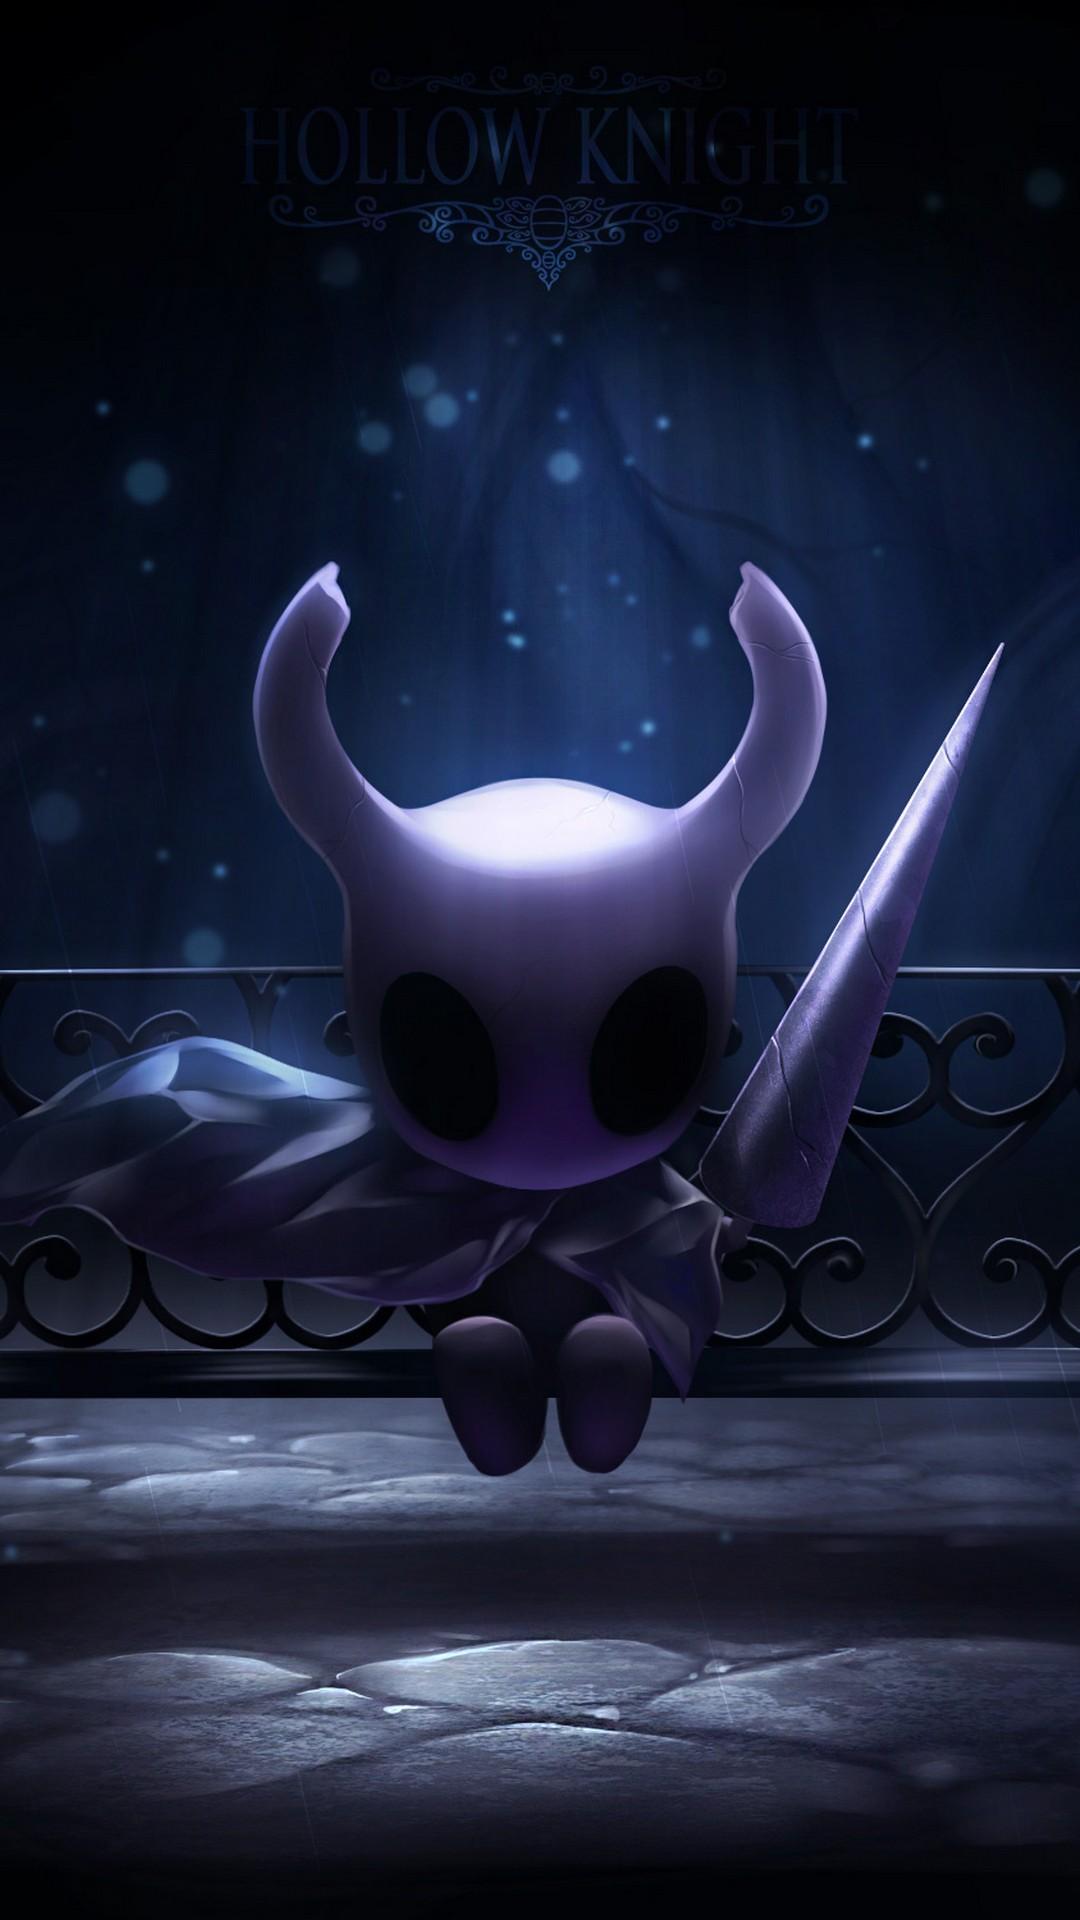 Hollow Knight HD Wallpaper For Android Android Wallpaper